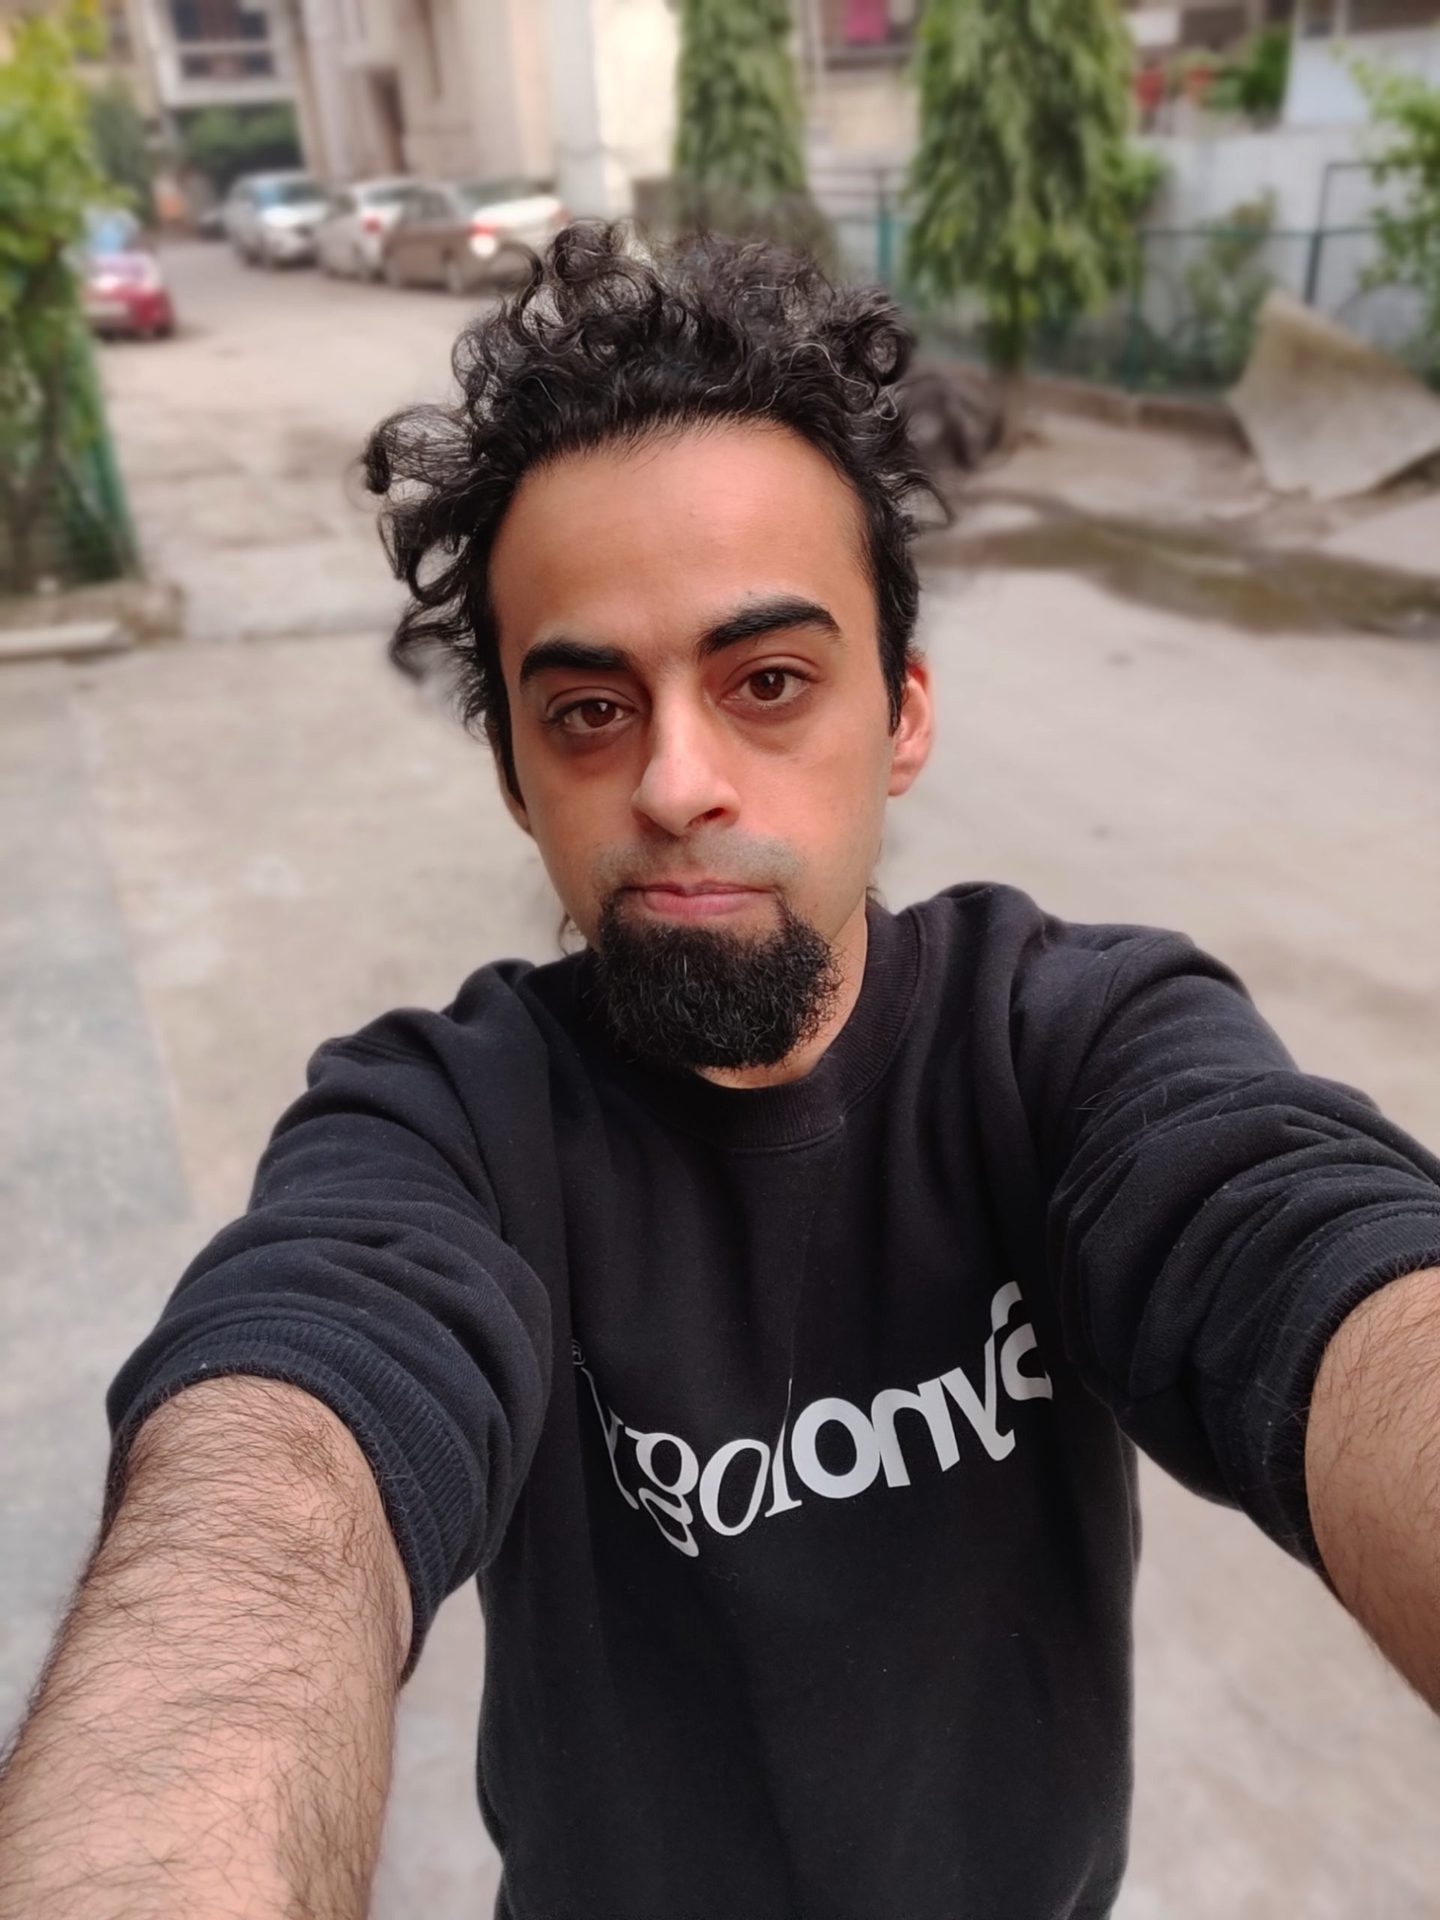 OnePlus 9RT selfie camera in portrait mode outside shot of a man with dark curly hair and a beard, wearing a black top